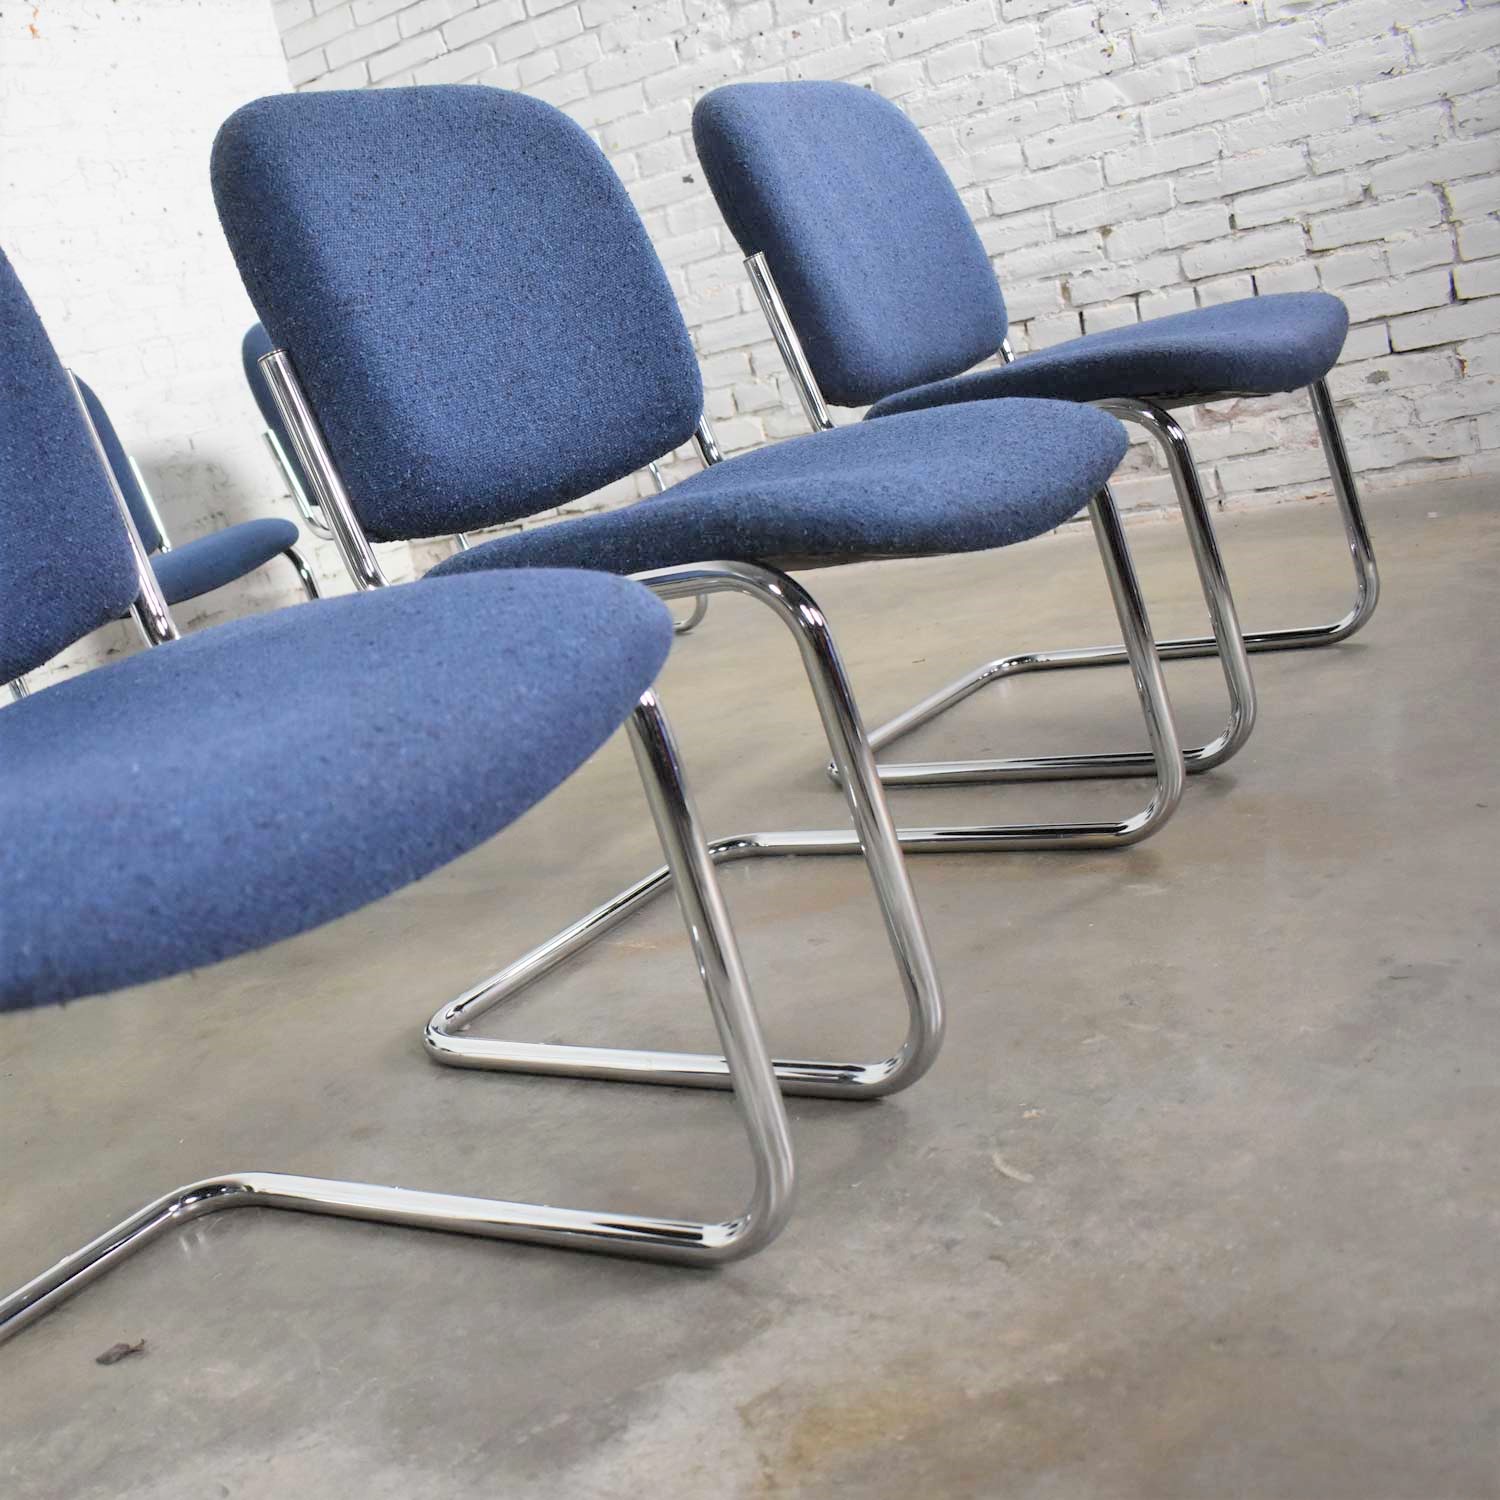 Vintage Tubular Chrome and Blue Fabric Cantilever Lounge Chair Armless Slipper Style, 7 Available